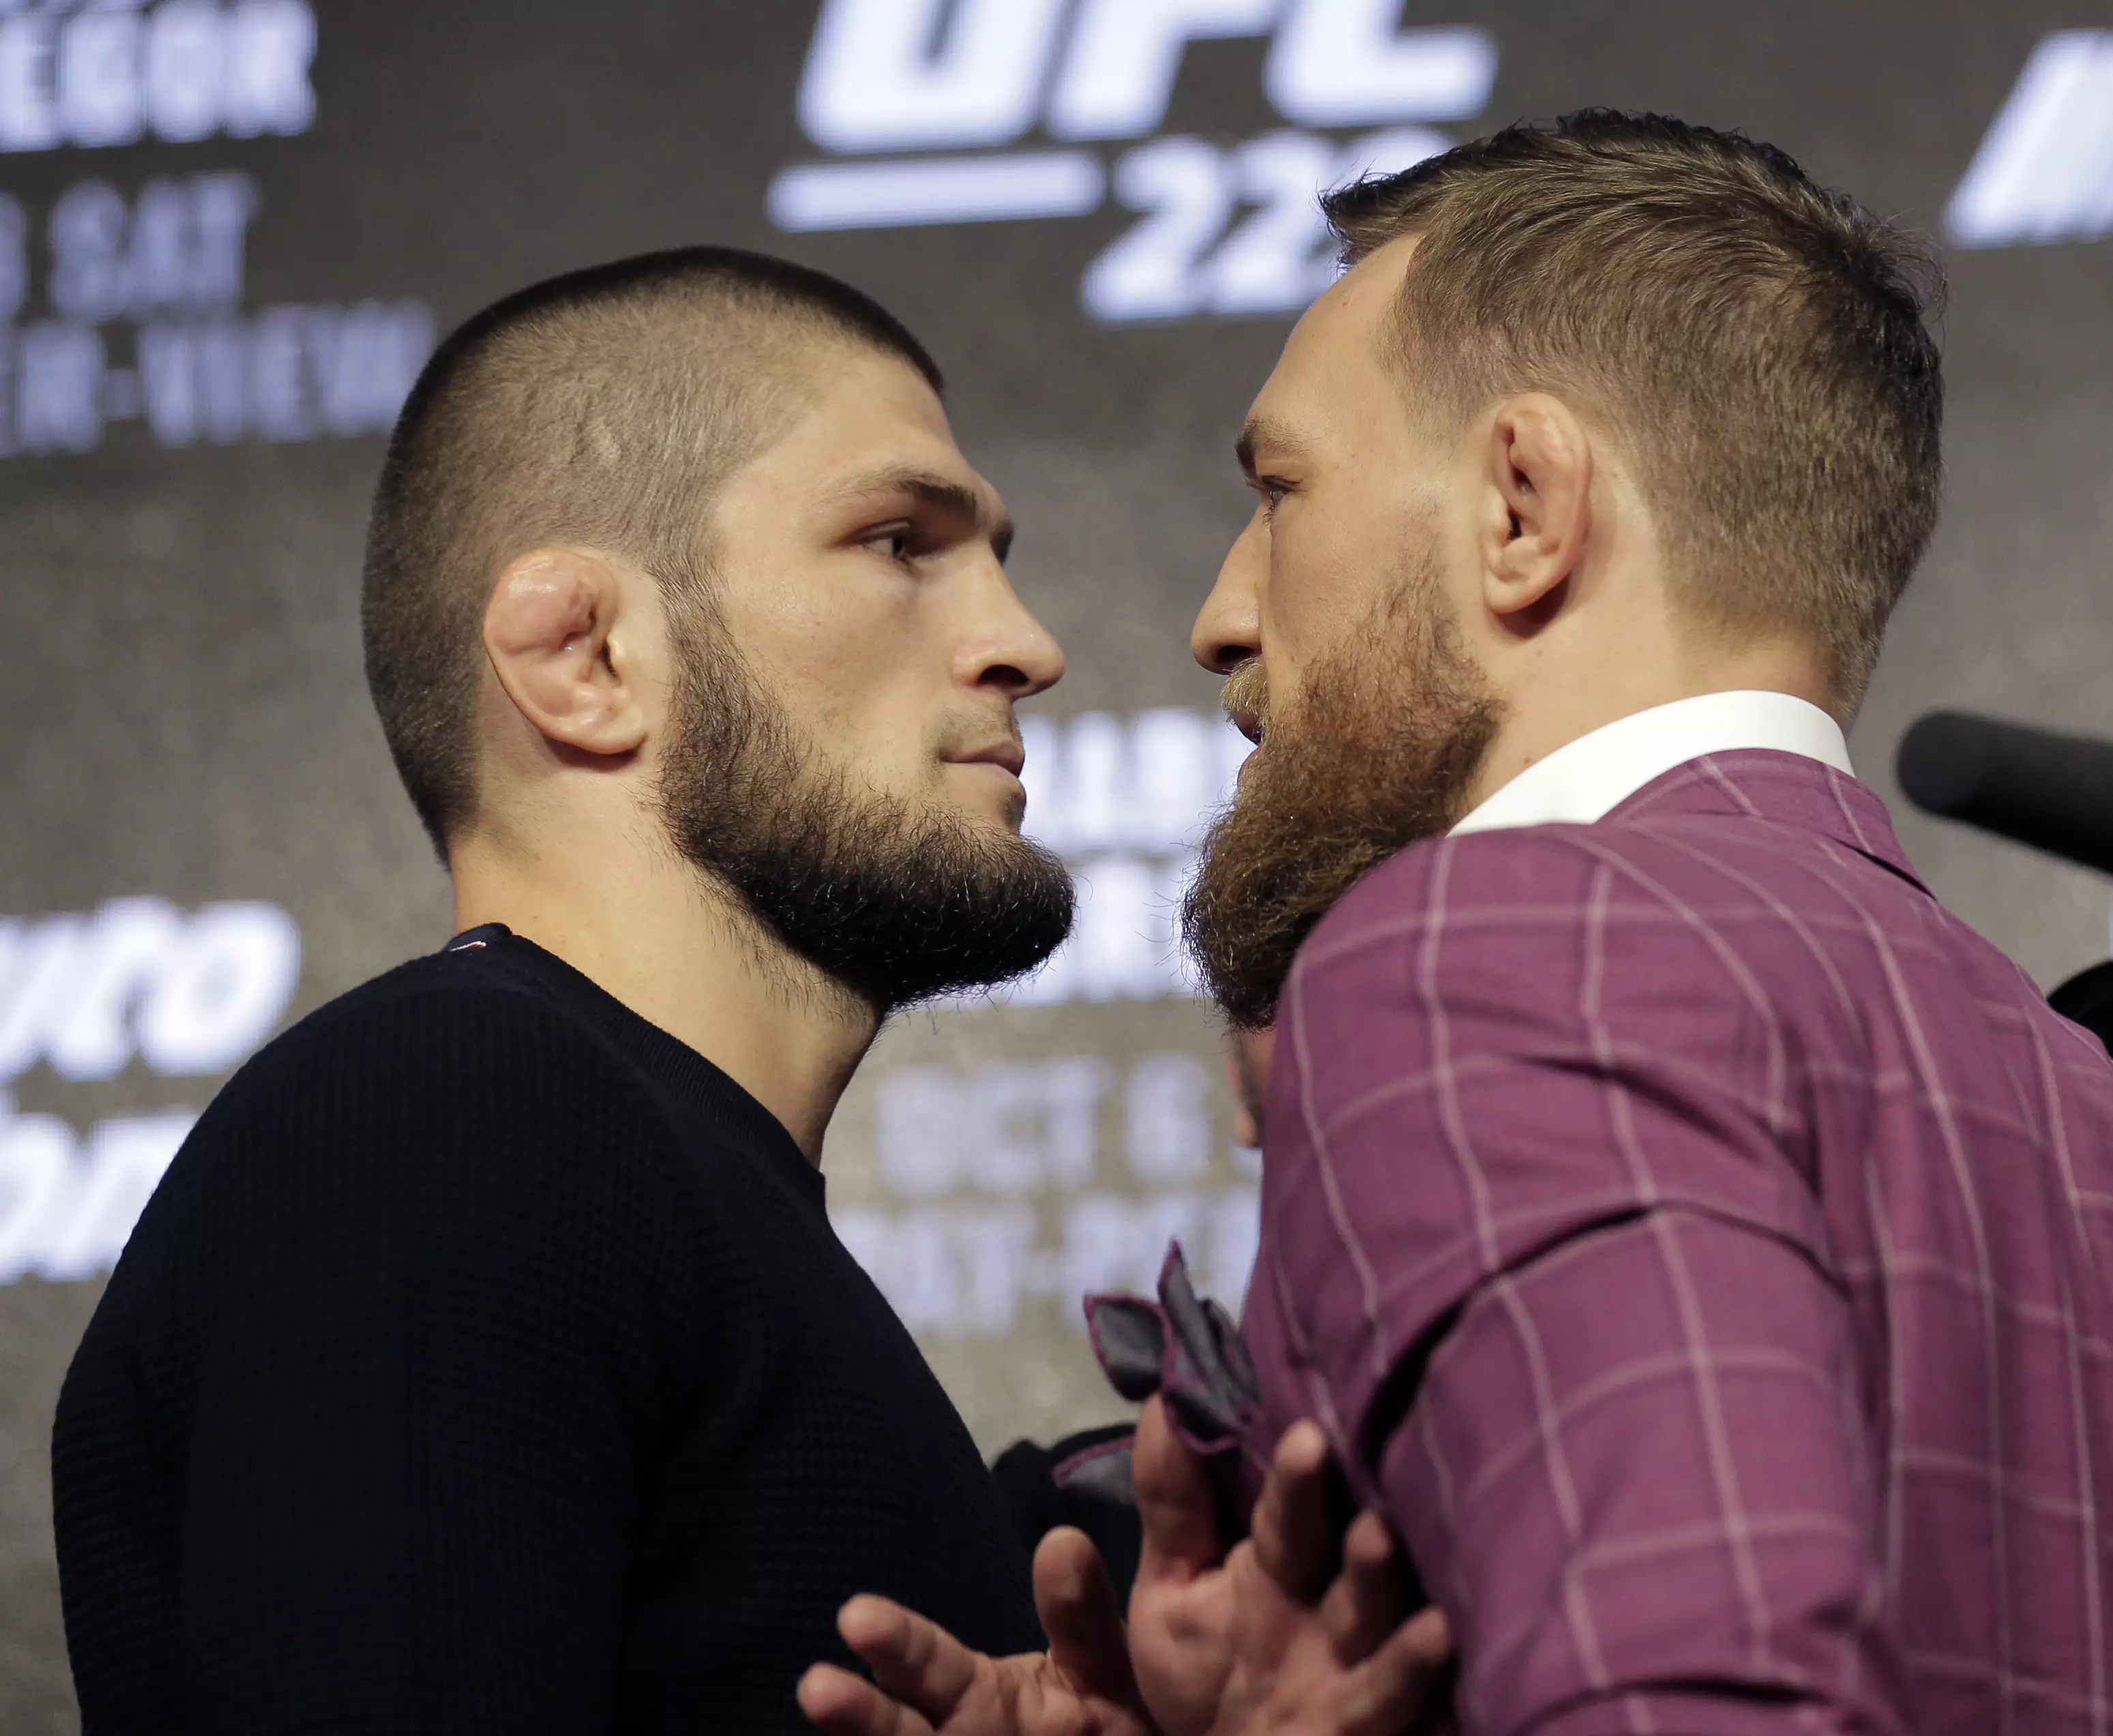 Khabib and McGregor come face to face. Image: PA Images